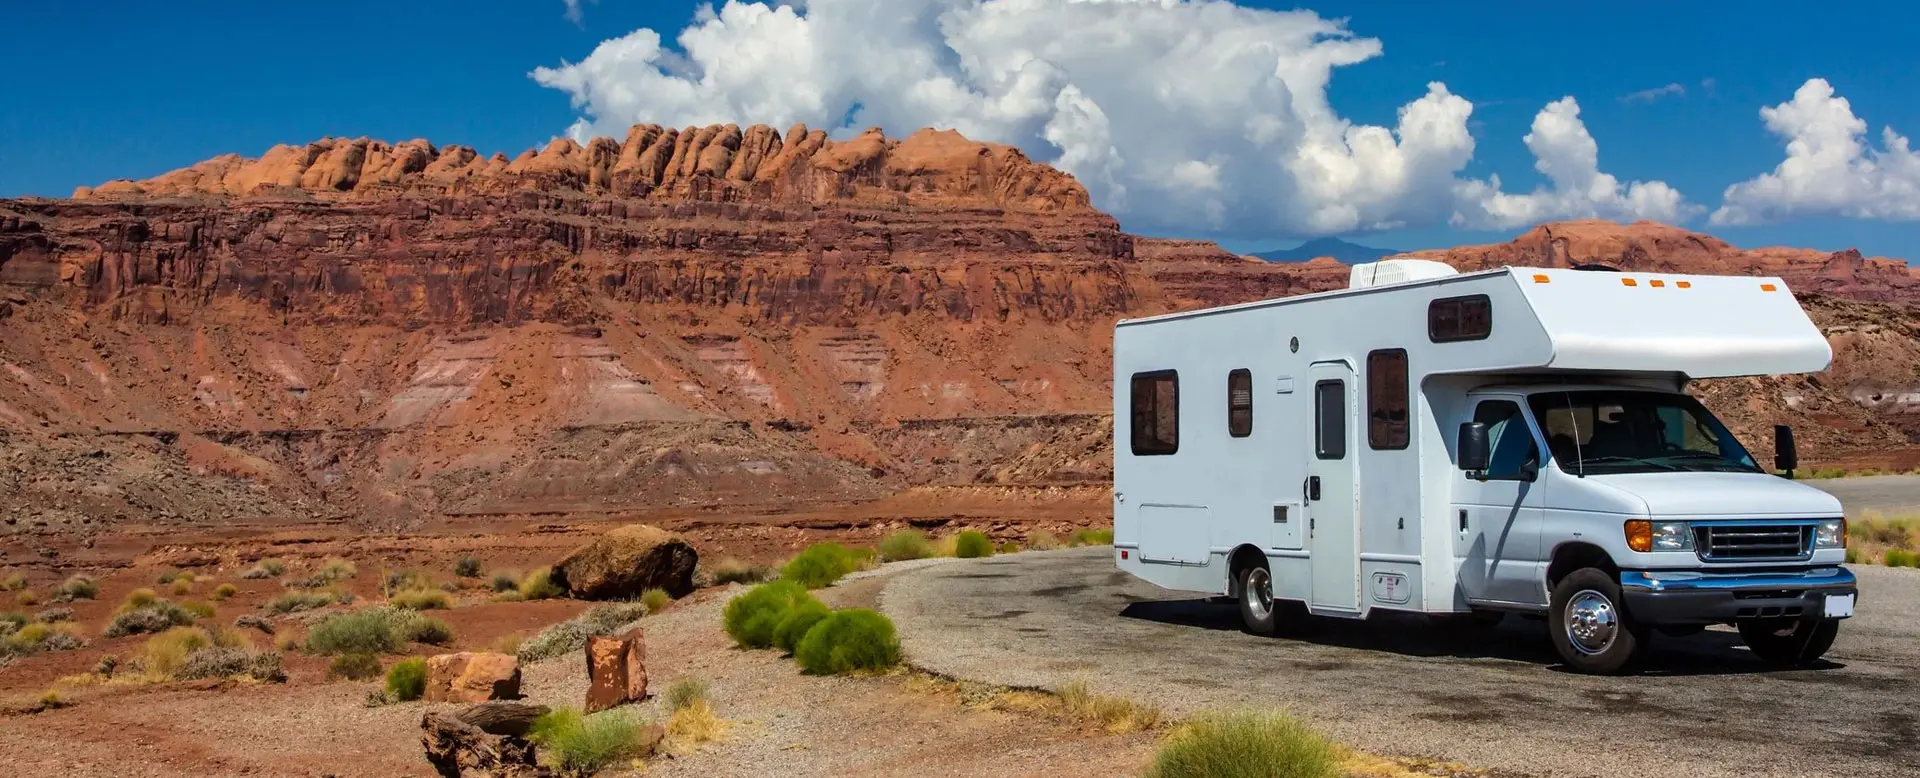 A white rv parked on the side of a road.